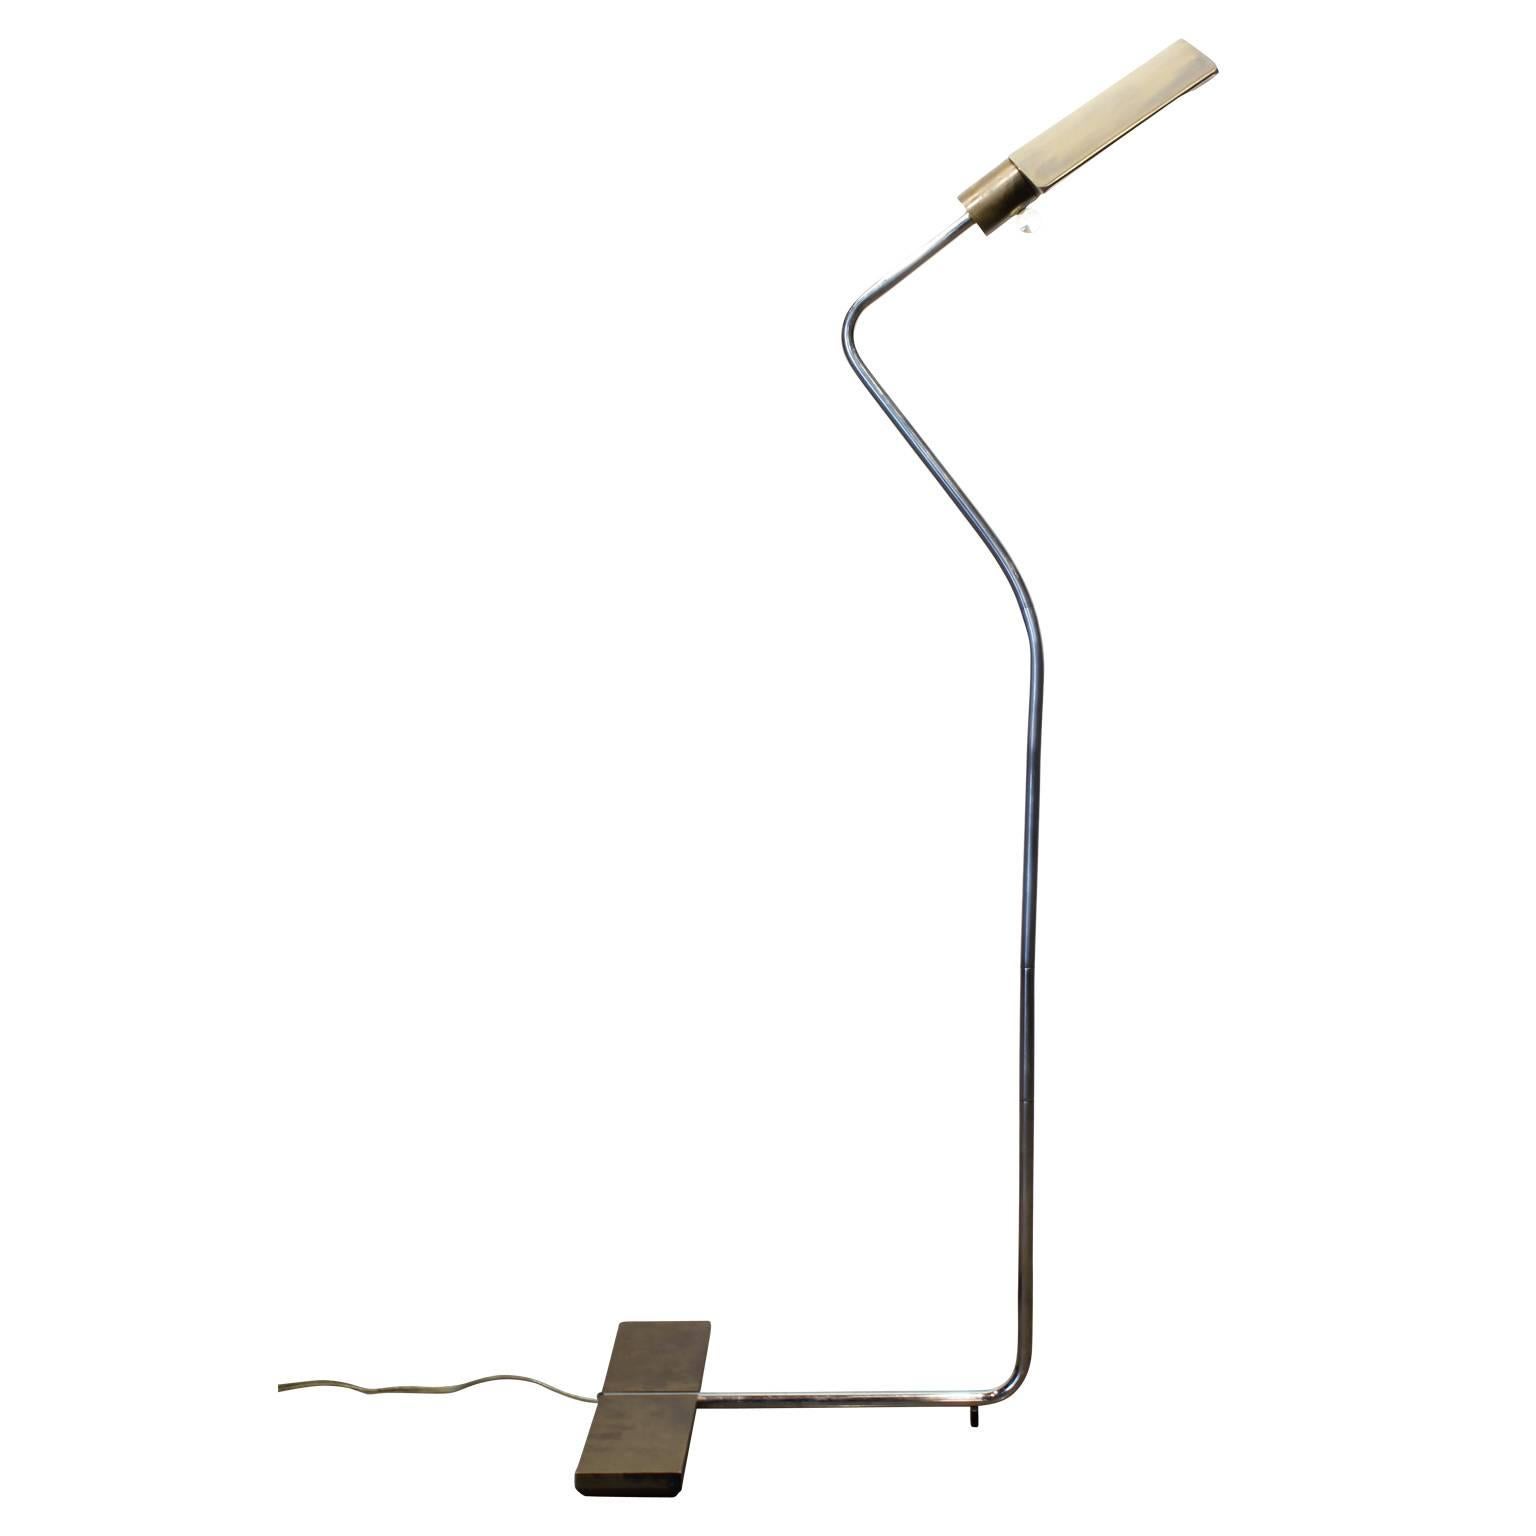 Gorgeous and rare early Cedric Hartman brass floor lamp with a Glass ball switch with a unique bend unlike any other Hartman lamps we've seen.